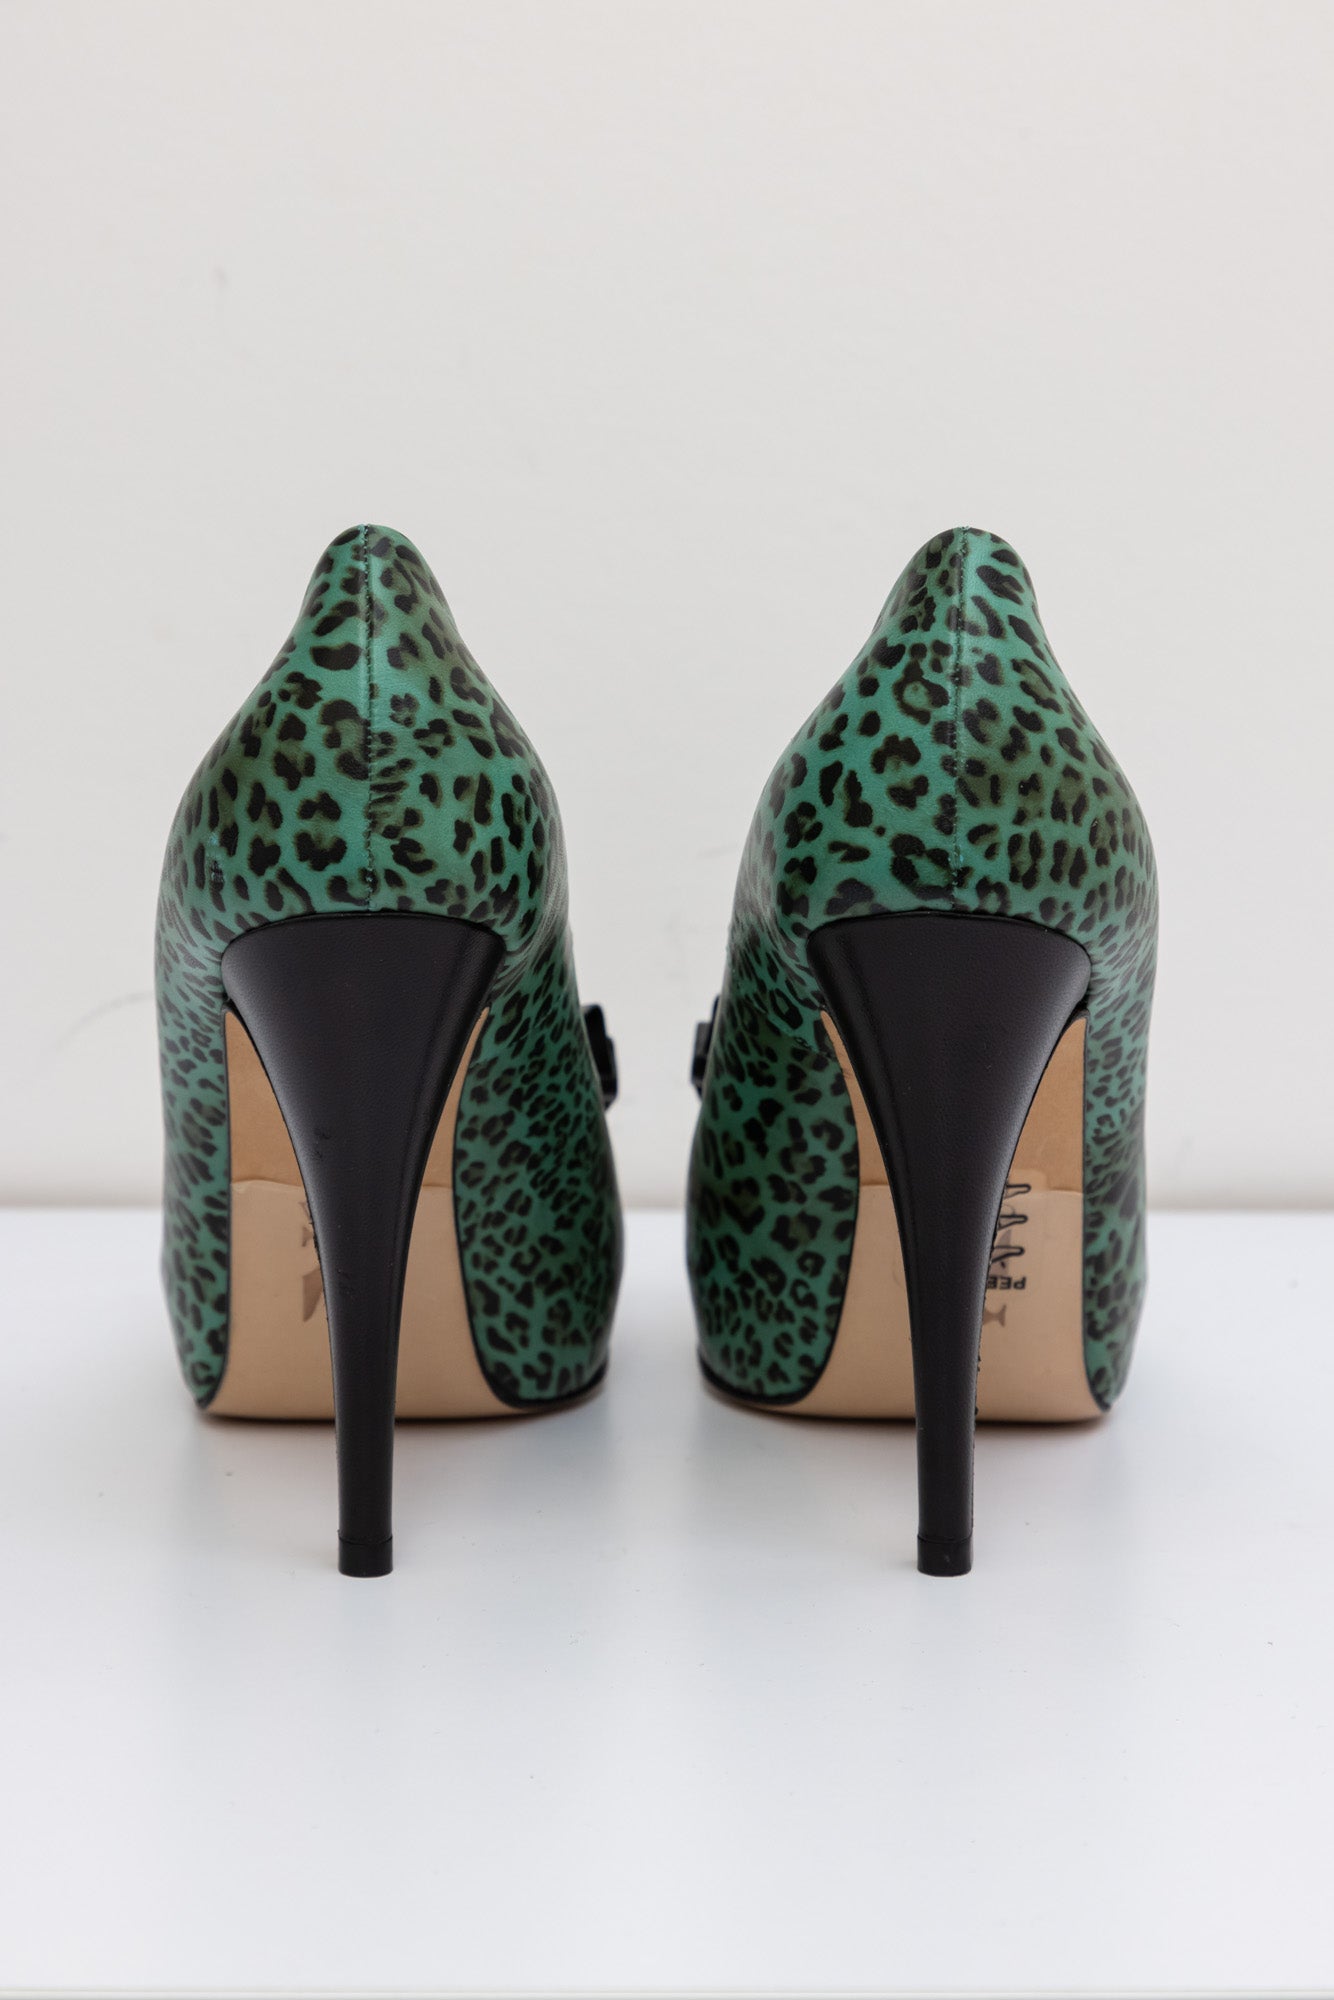 GINA Leather Green Heels Shoes with Leopard Print